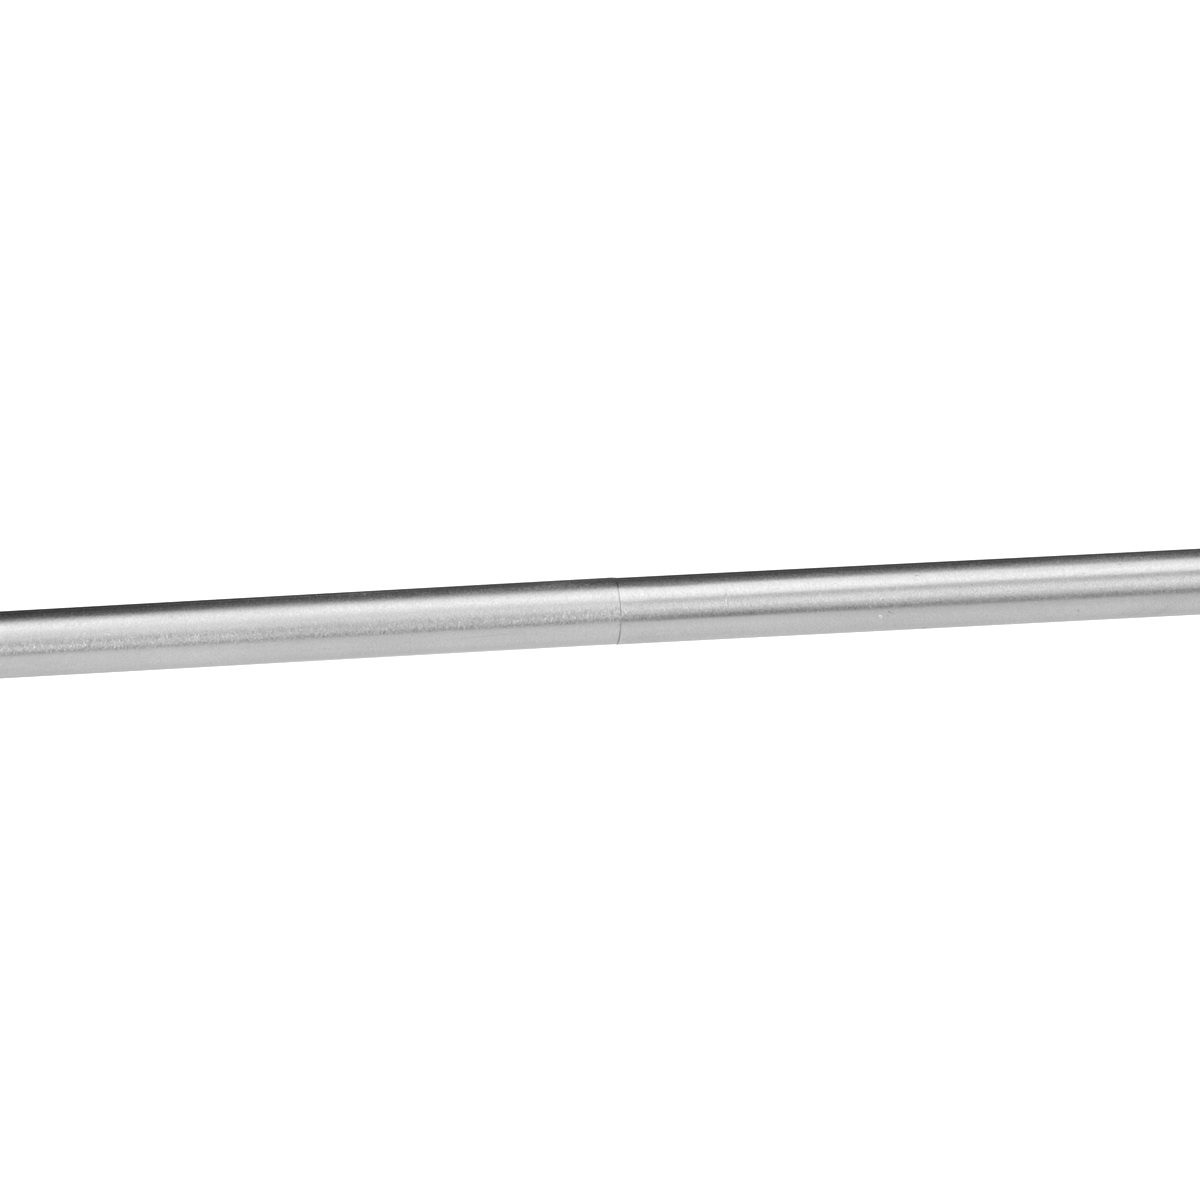 1/4'' Stainless Steel Rod, Length: 36'' (Inside use only)